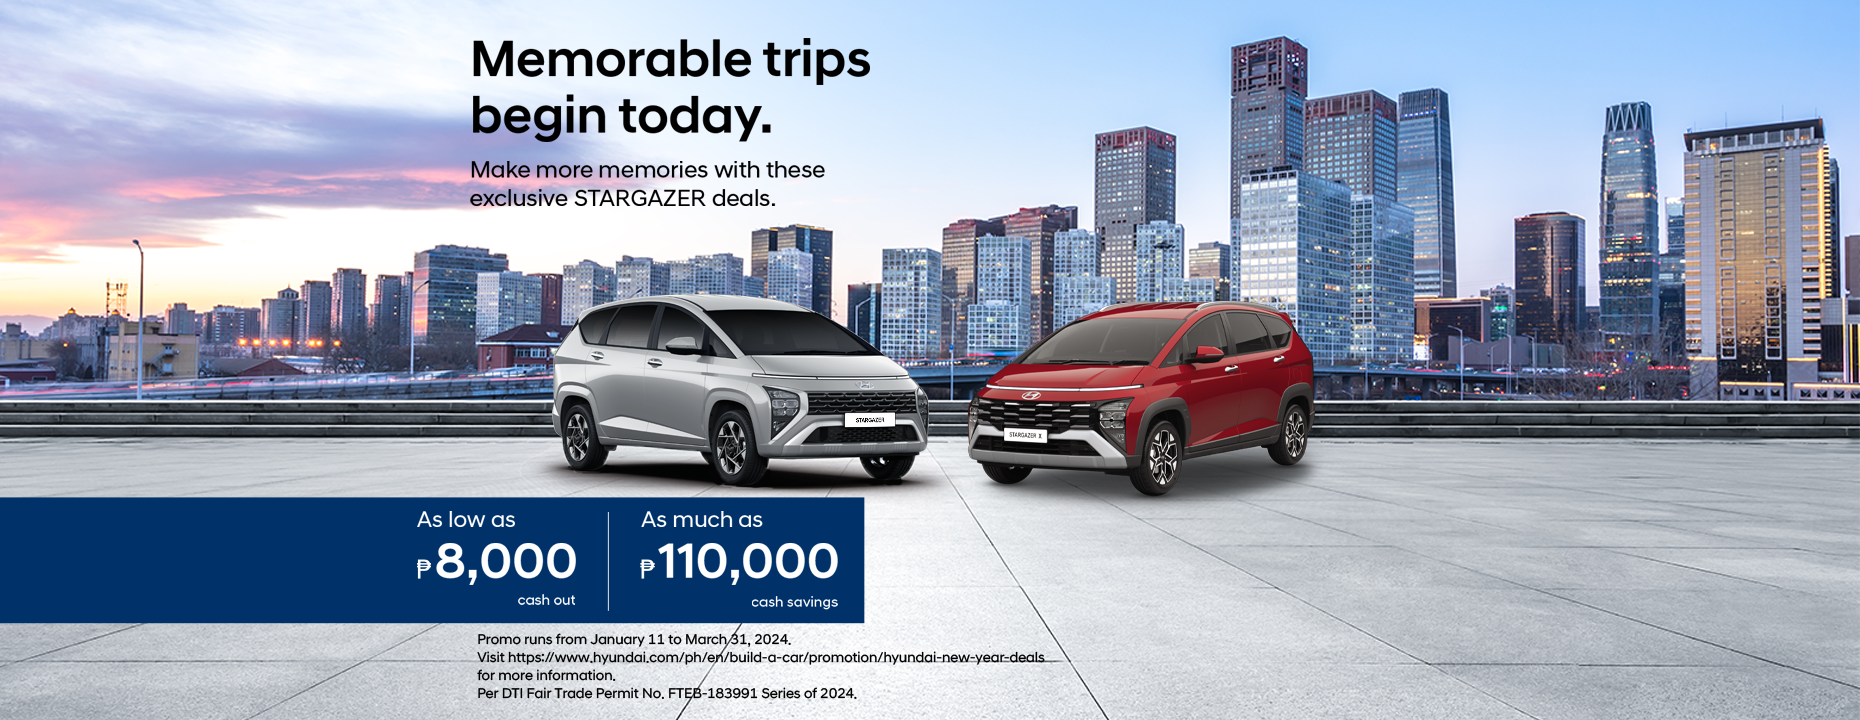 two hyundai stargazer vehicles in a skyline background with sales promo details